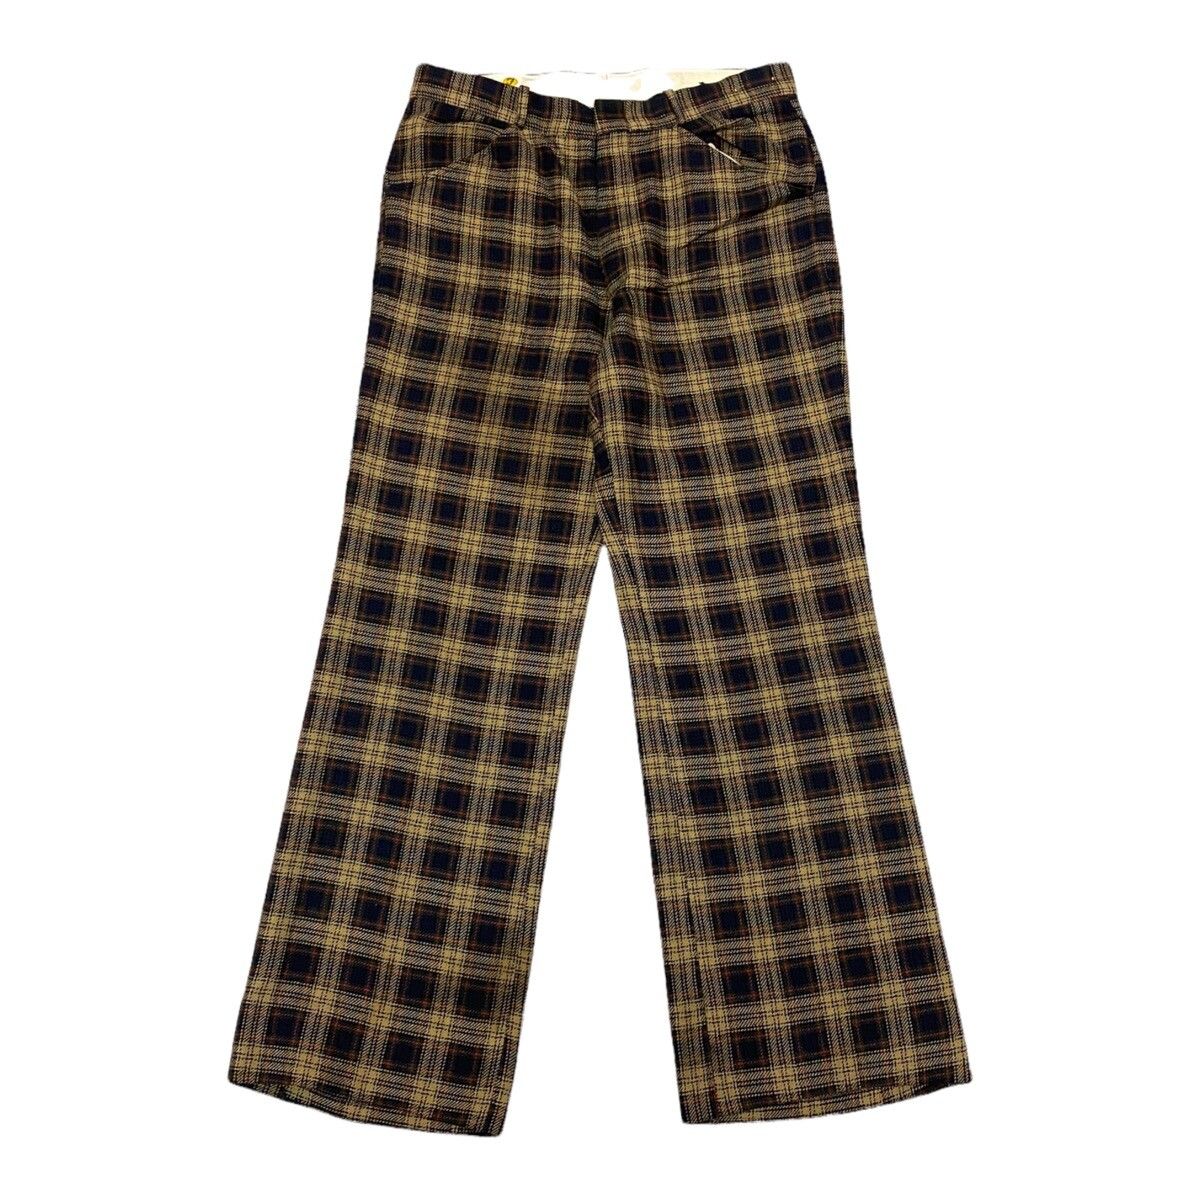 Archival Clothing - 🔥FARAH AW1998 CHECKED PLAID WOOL PANTS MADE IN ITALY - 1